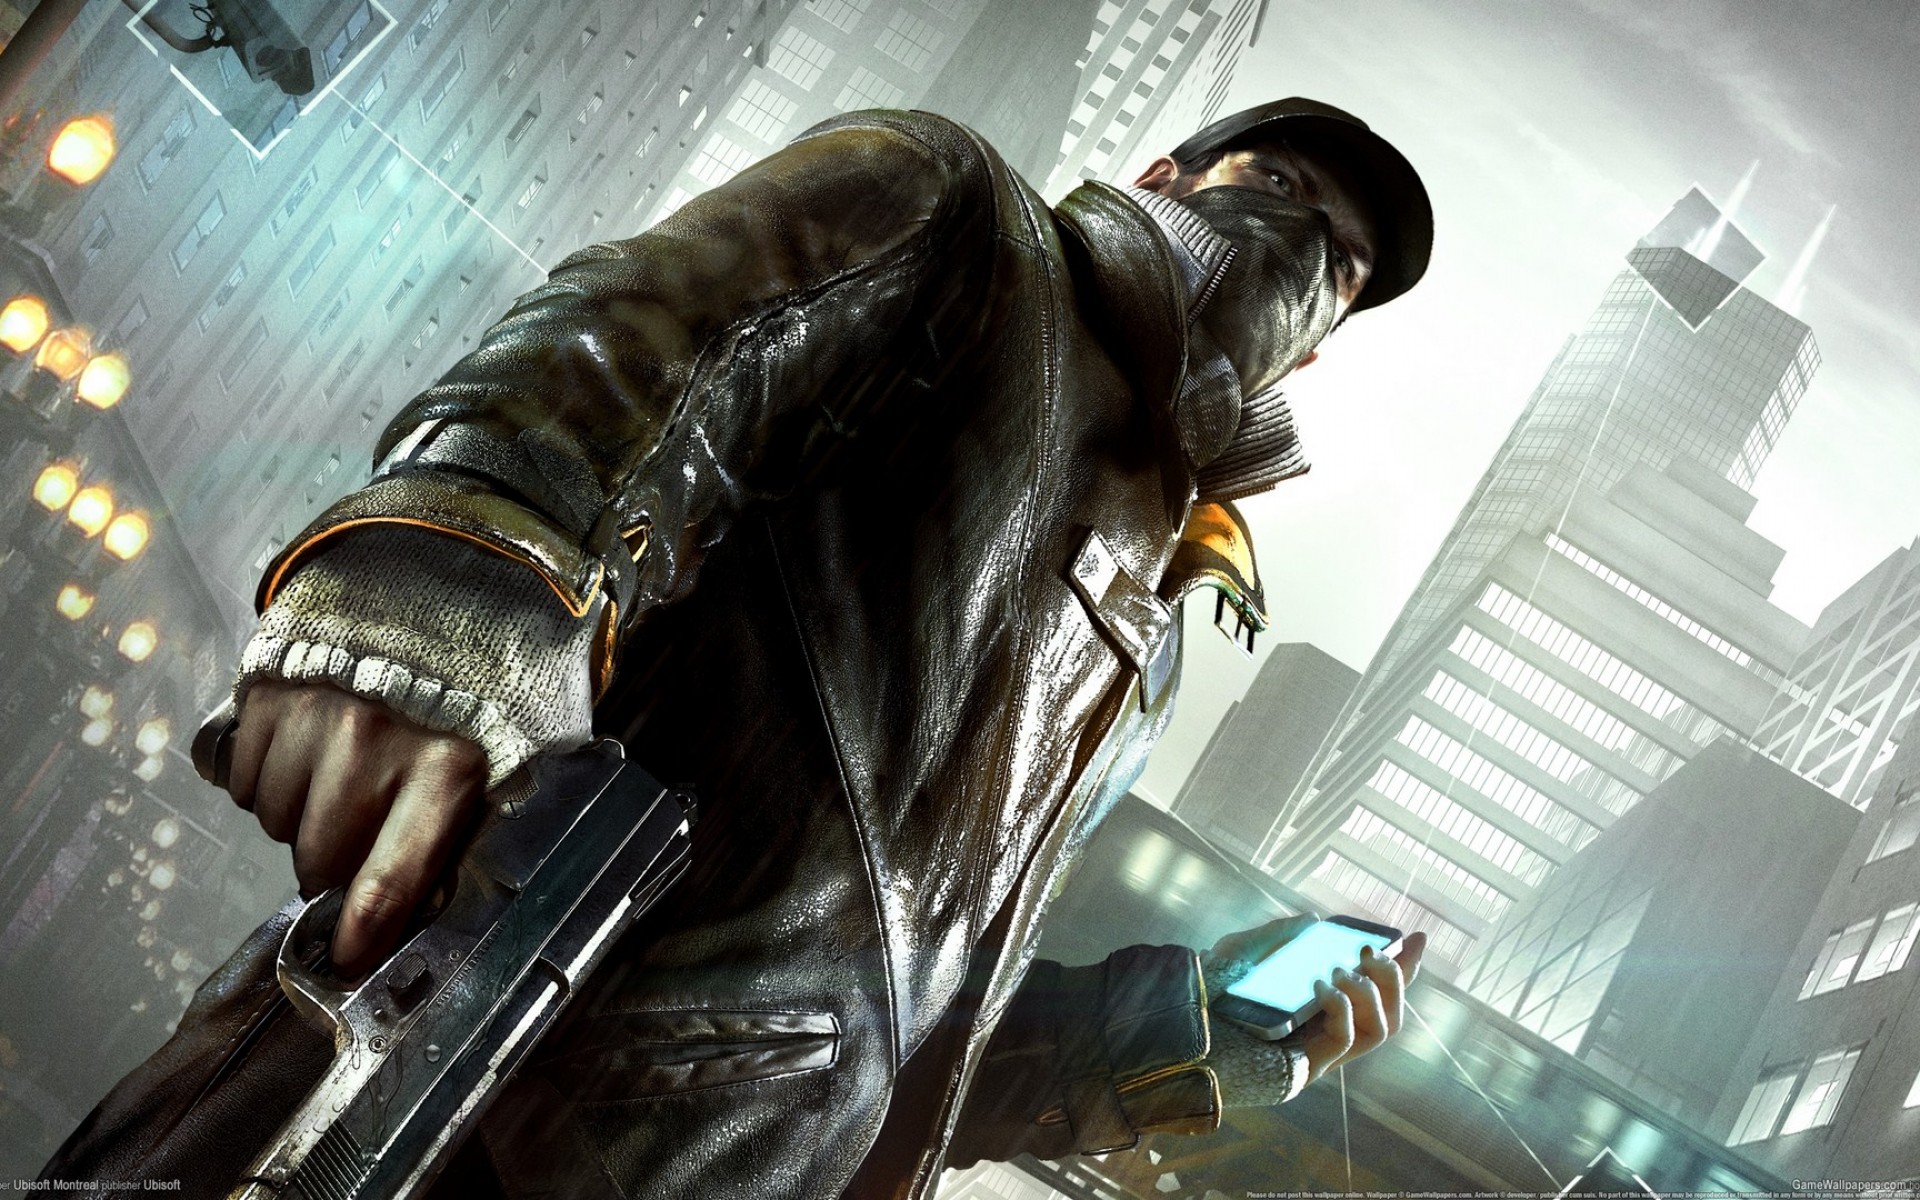 Aiden Pearce (WATCH_DOGS). He's badass, and you know it. I think this is the only time a chick would be okay with her guy having his phone in his hand all the time xD